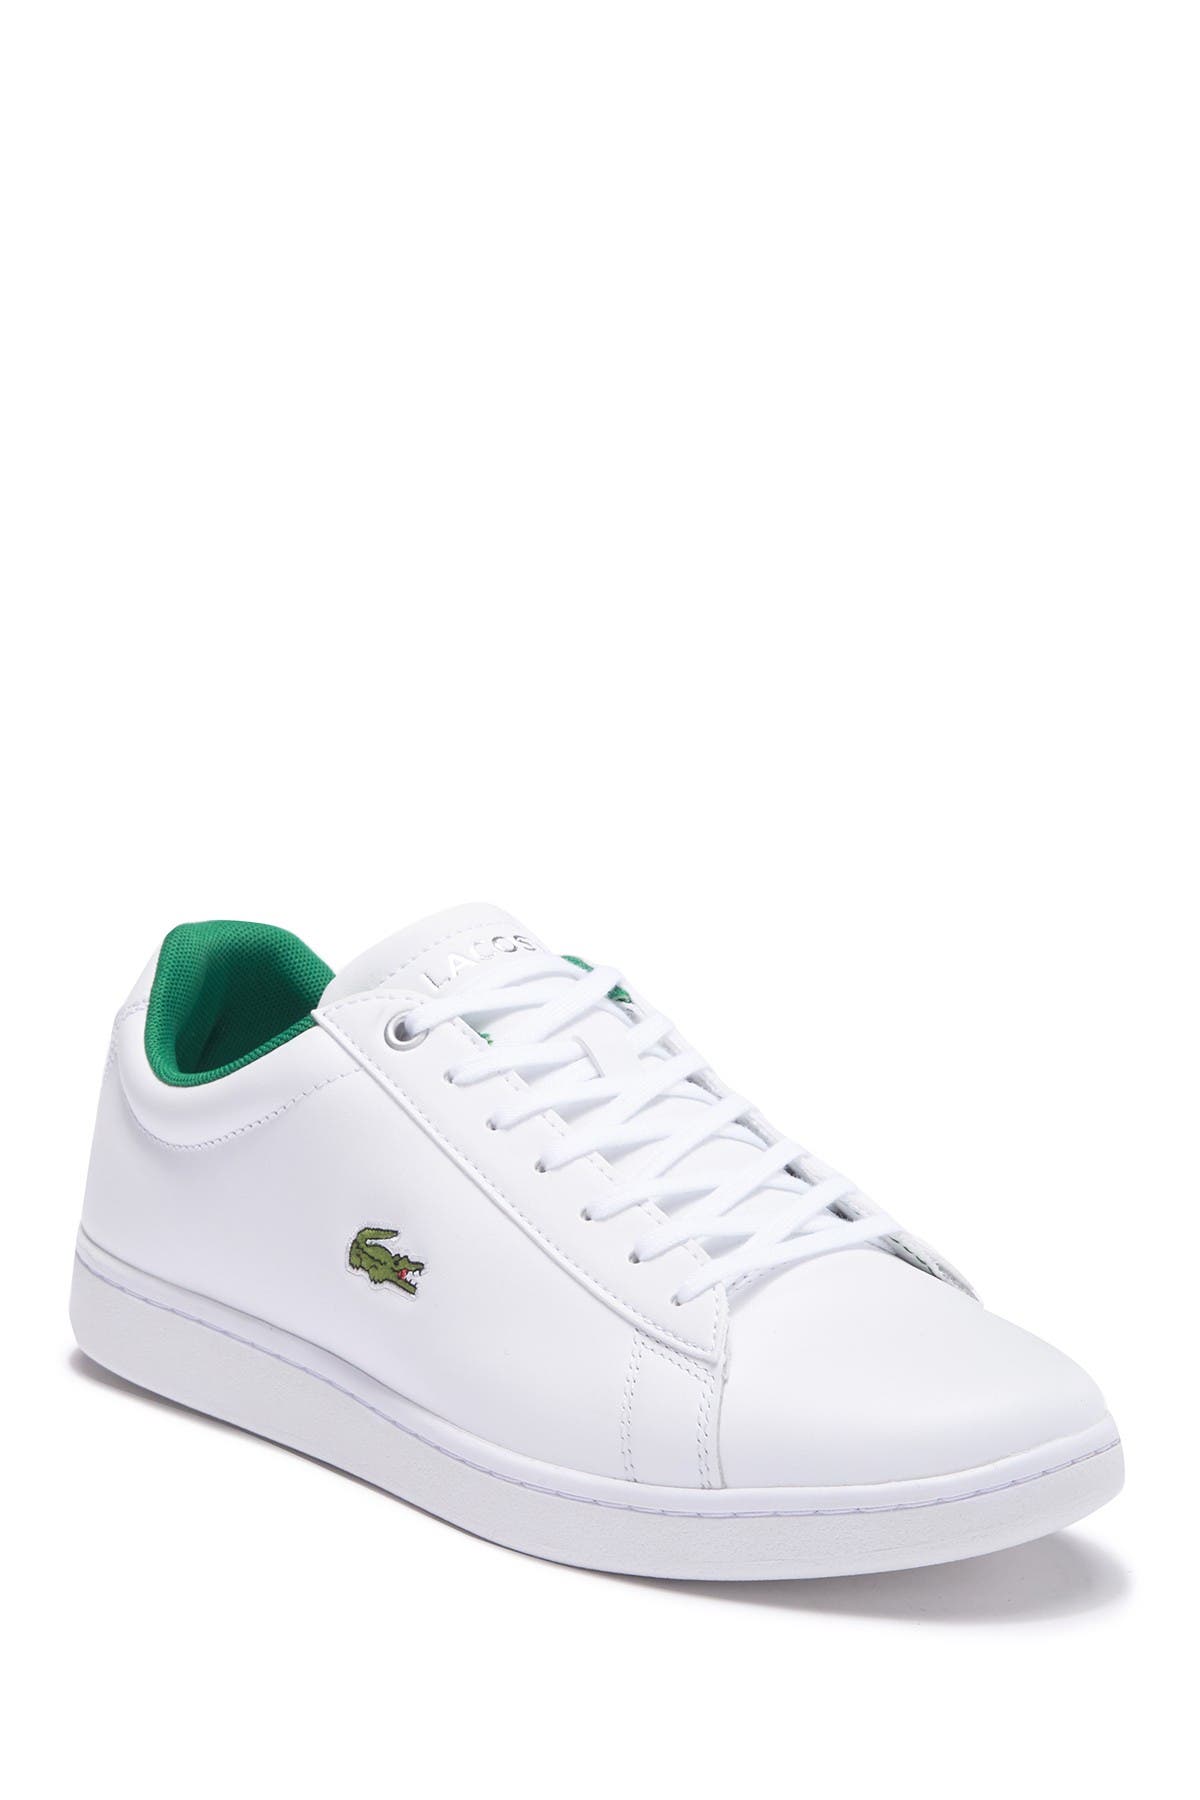 Lacoste | Hydez Leather Sneaker 